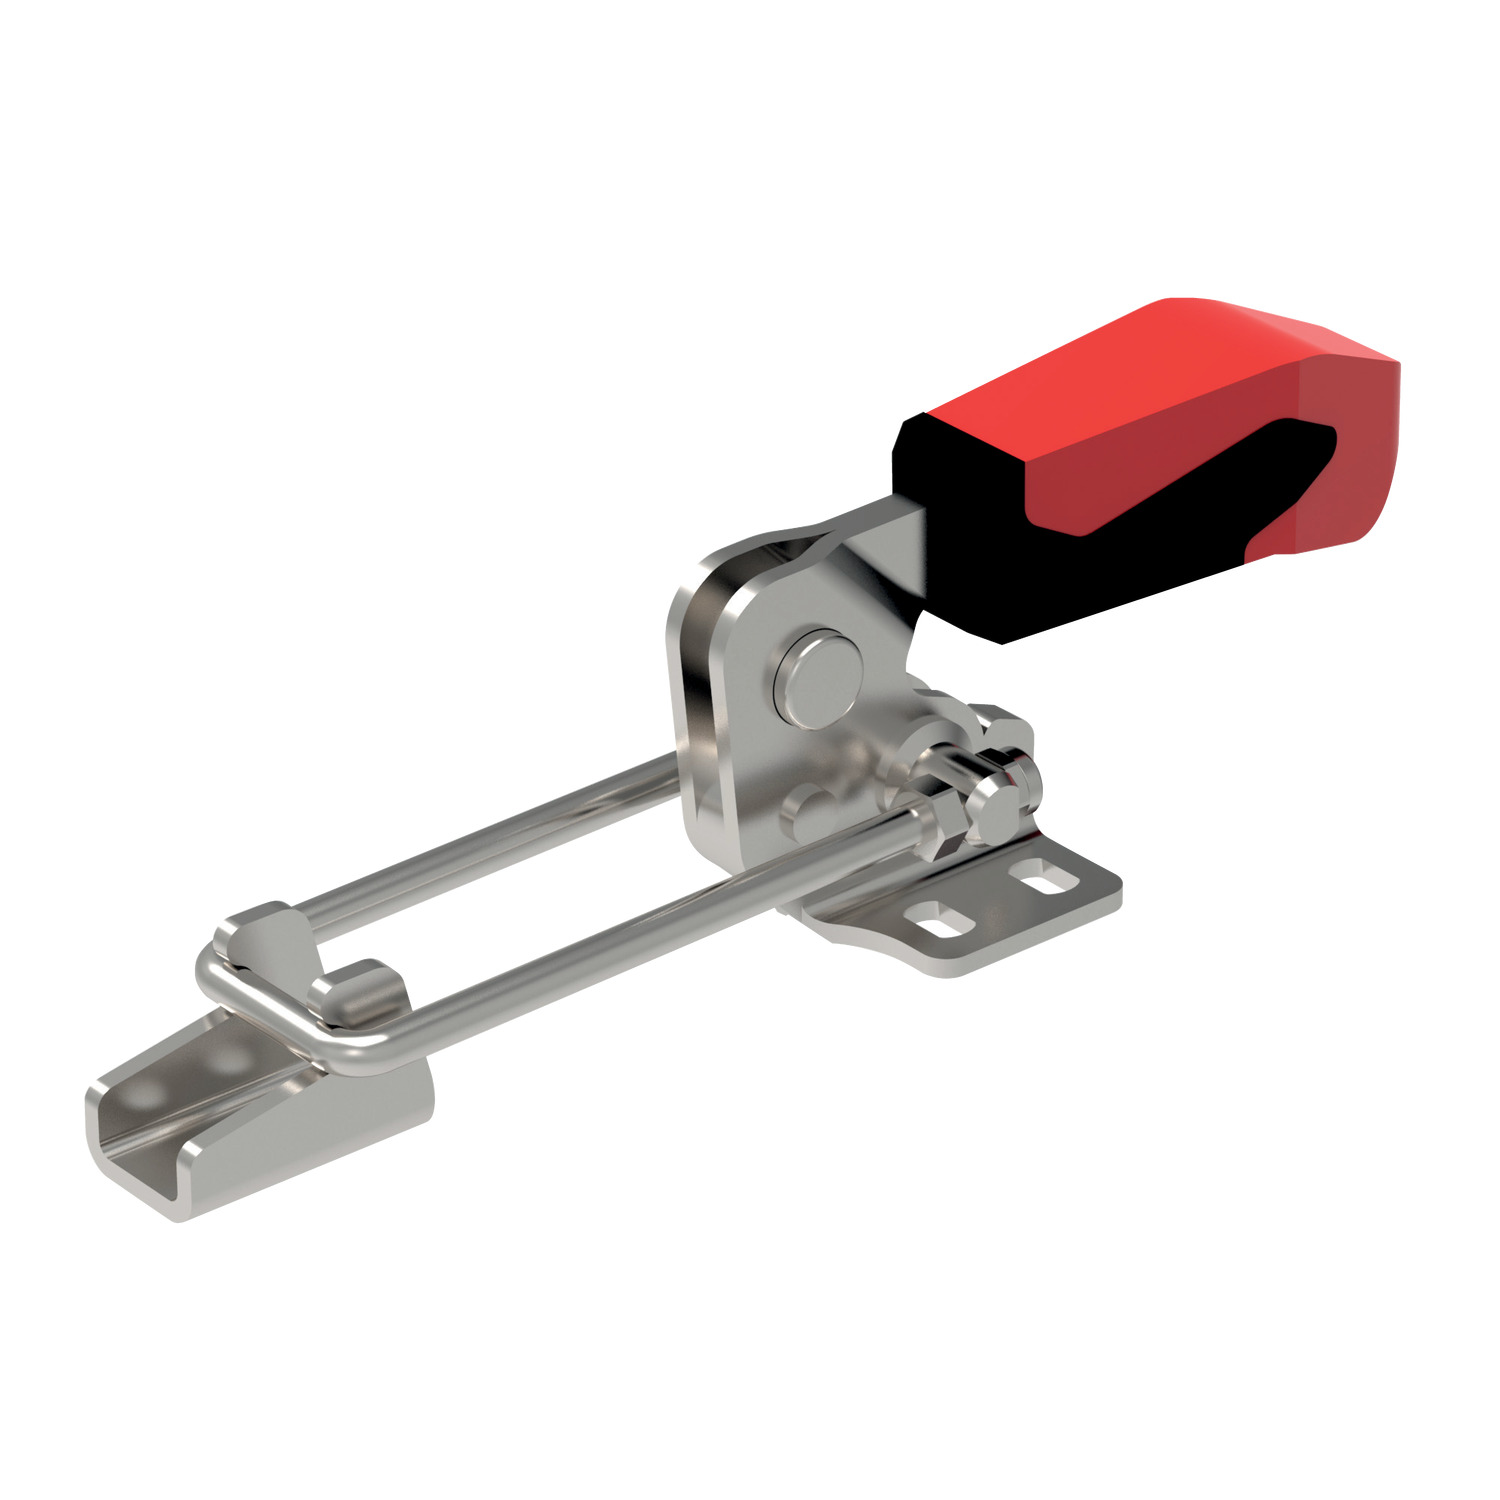 41805.4 - Latch Type Toggle Clamps